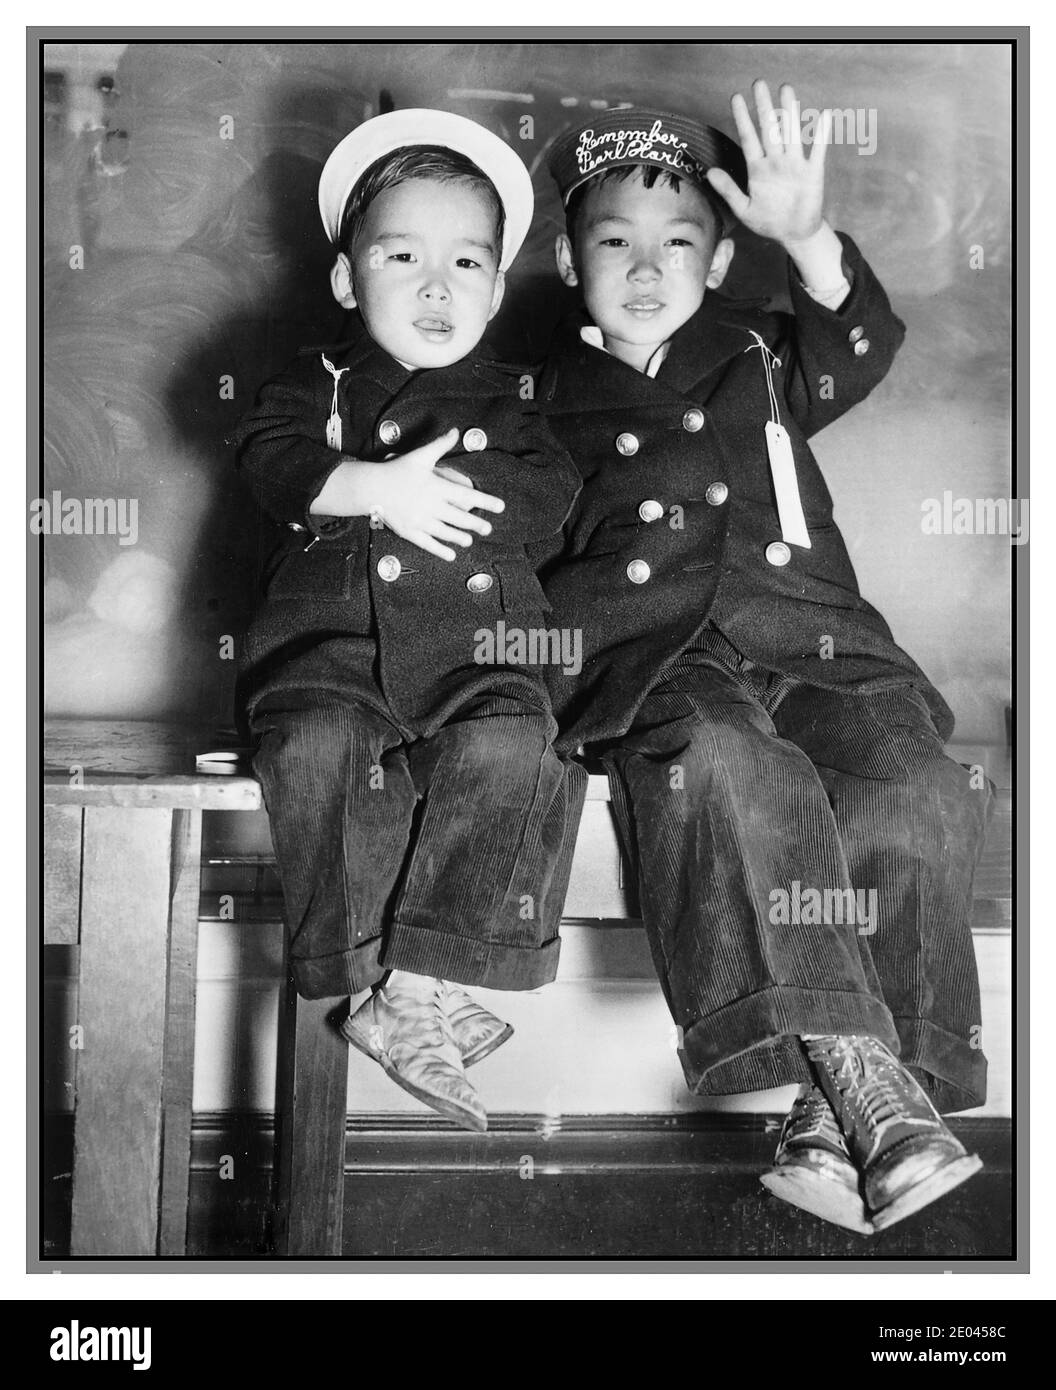 WW2 Propaganda Photo Japanese Evacution from USA San Francisco (Calif.) 1941 evacuation - Two Japanese boys, one with strip 'Remember Pearl Harbor' on his hat, wave good-bye [while] awaiting the bus United States. Army. Signal Corps.[1942] -  Evacuations--California--San Francisco--1940-1950 -  Boys--California--San Francisco--1940-1950 -  World War, 1939-1945--Japanese Americans--California--San Francisco Arrivals & departures--California--San Francisco--1940-1950 Photographic prints--1940-1950. Stock Photo